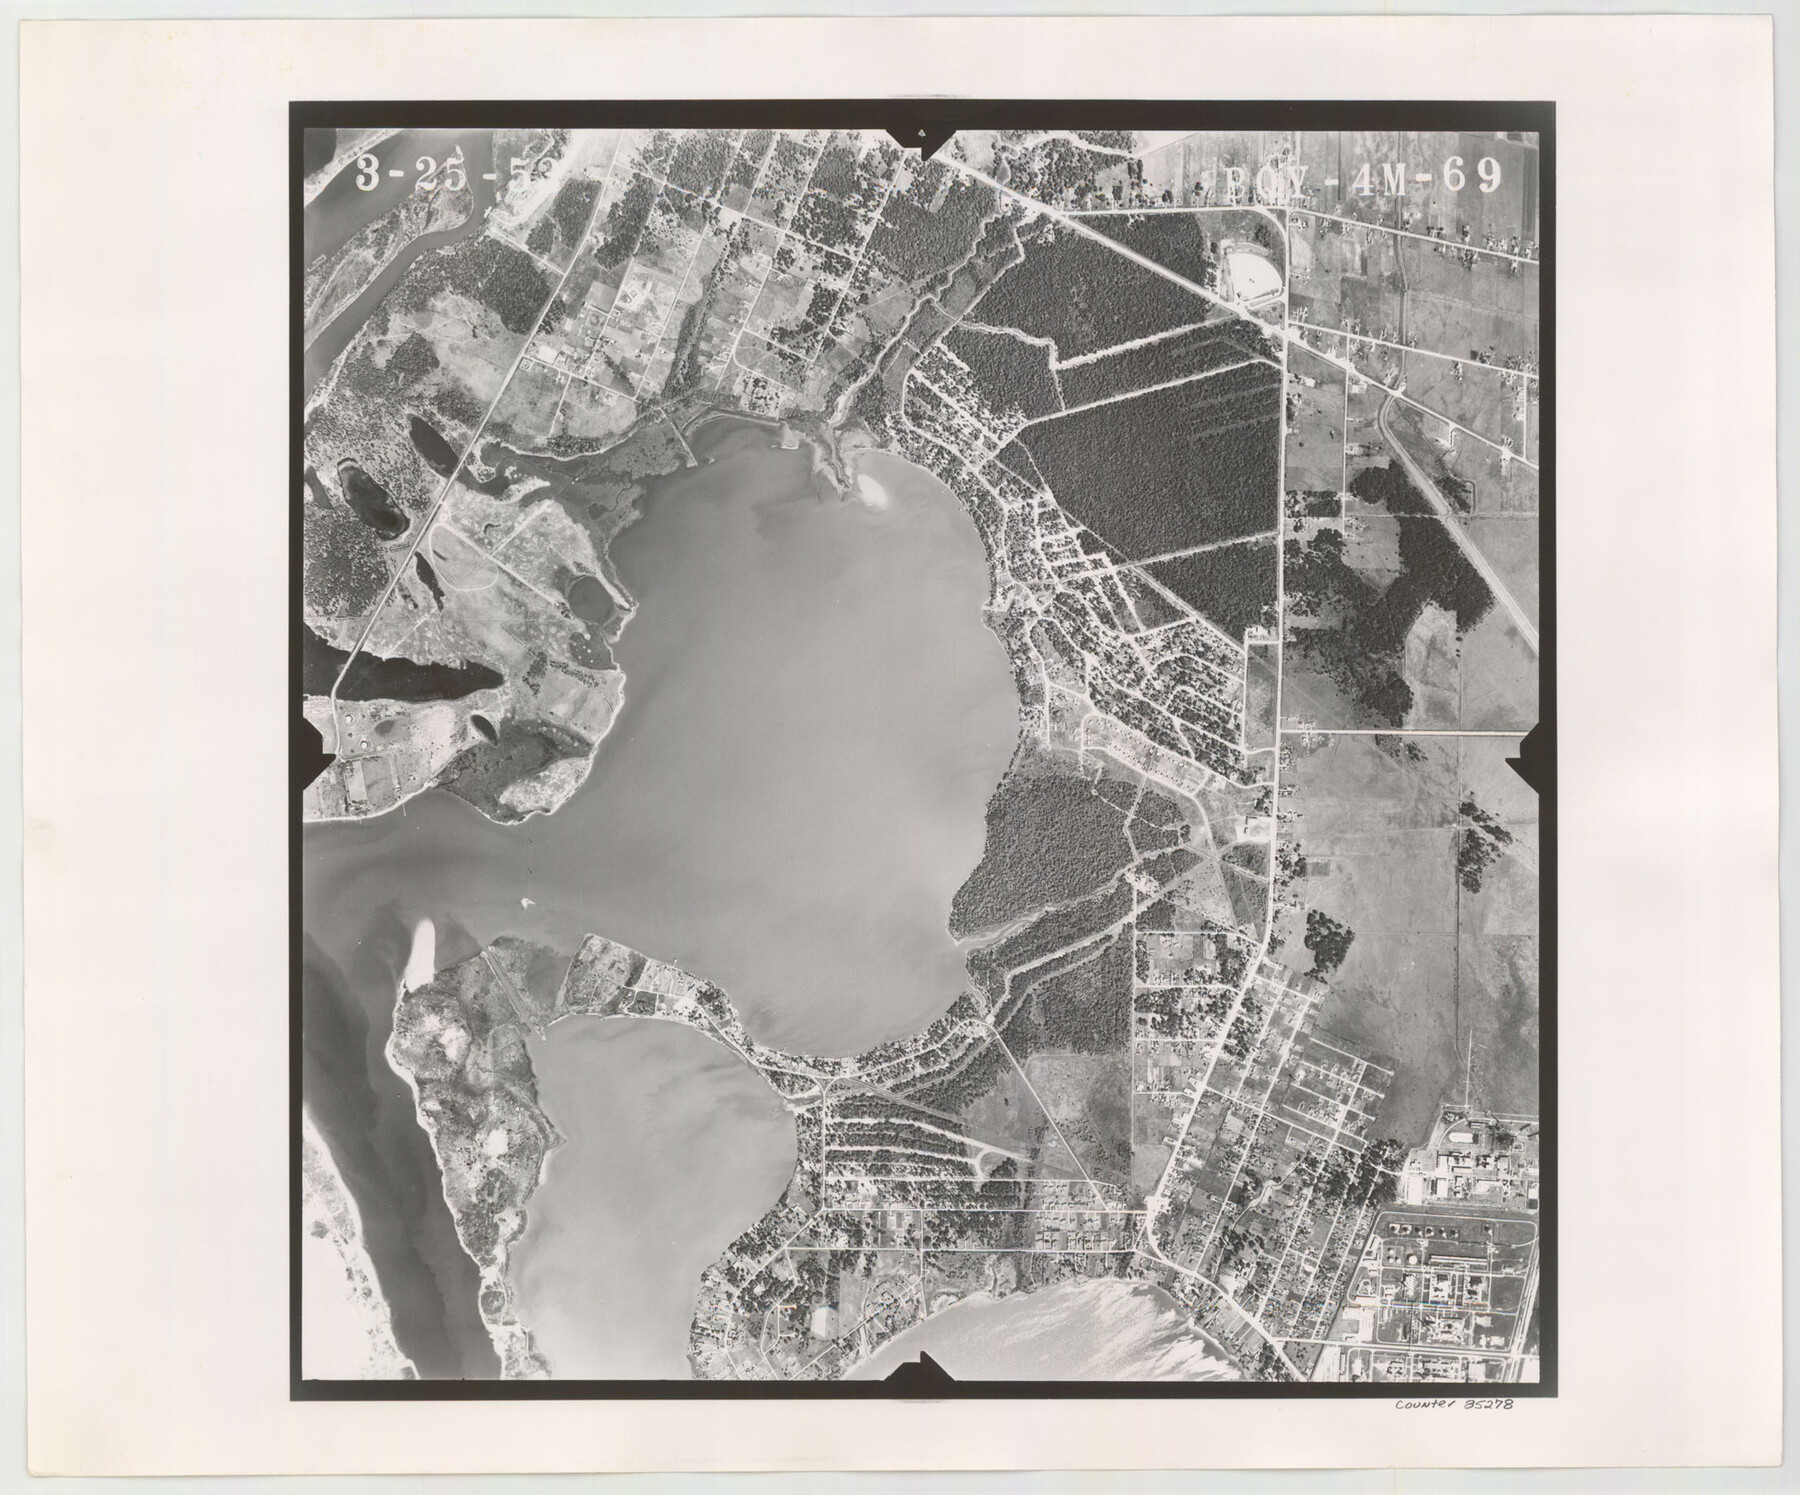 85278, Flight Mission No. BQY-4M, Frame 69, Harris County, General Map Collection